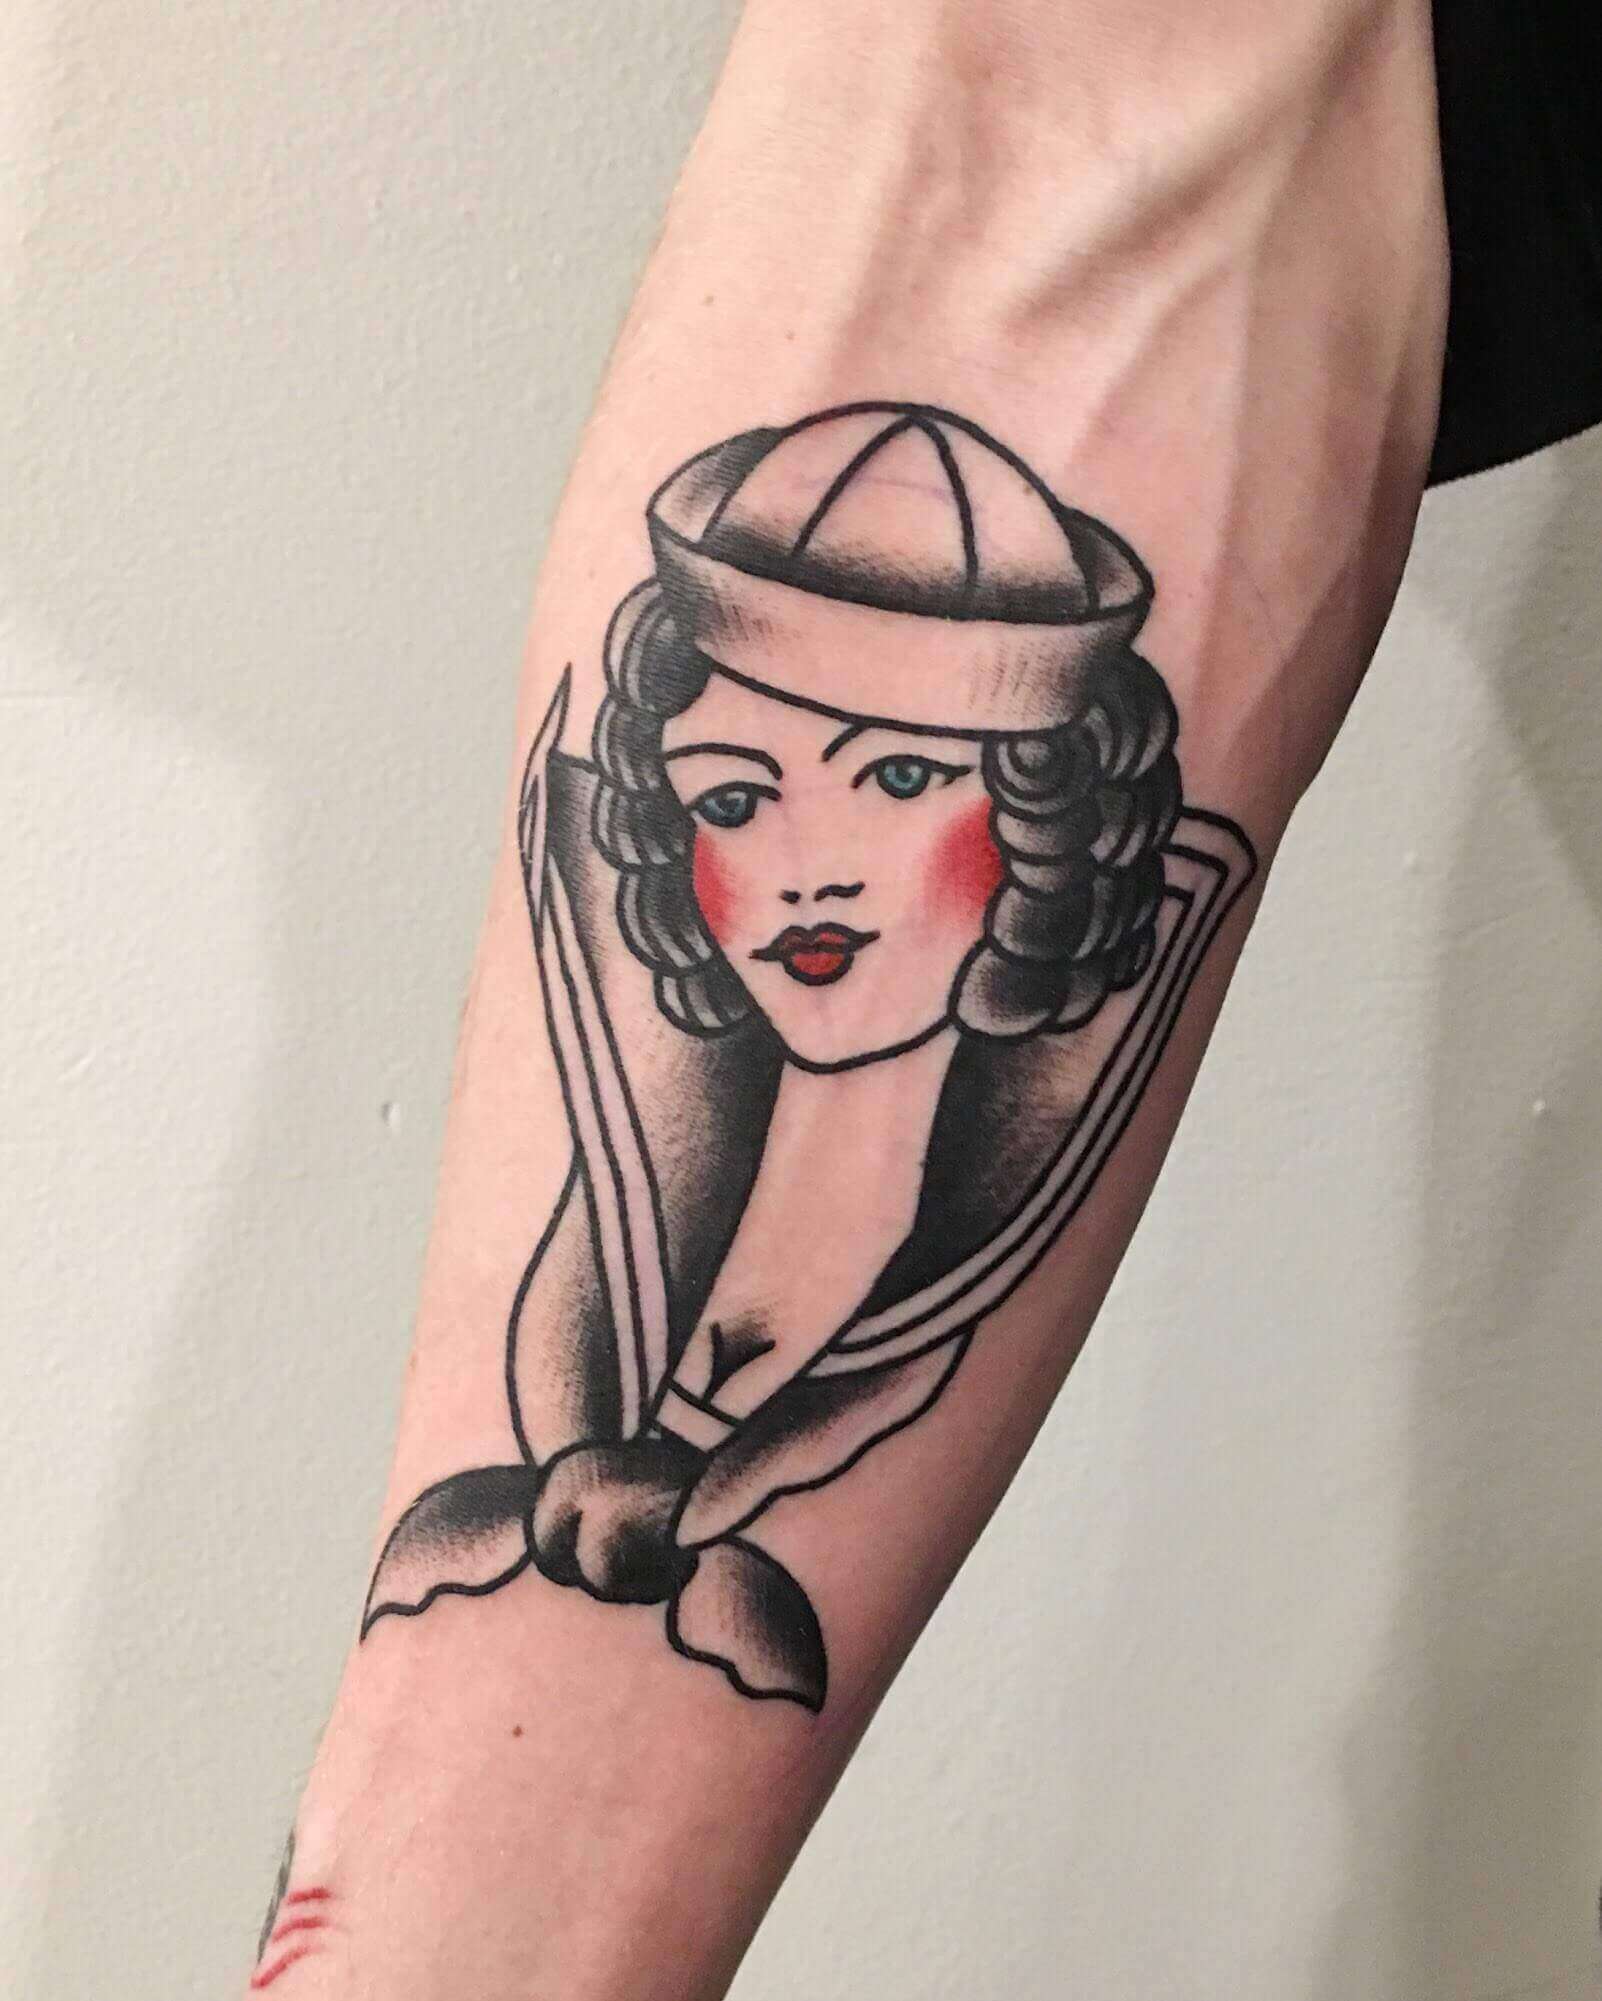 sailor jerry pinup tattoo on arm